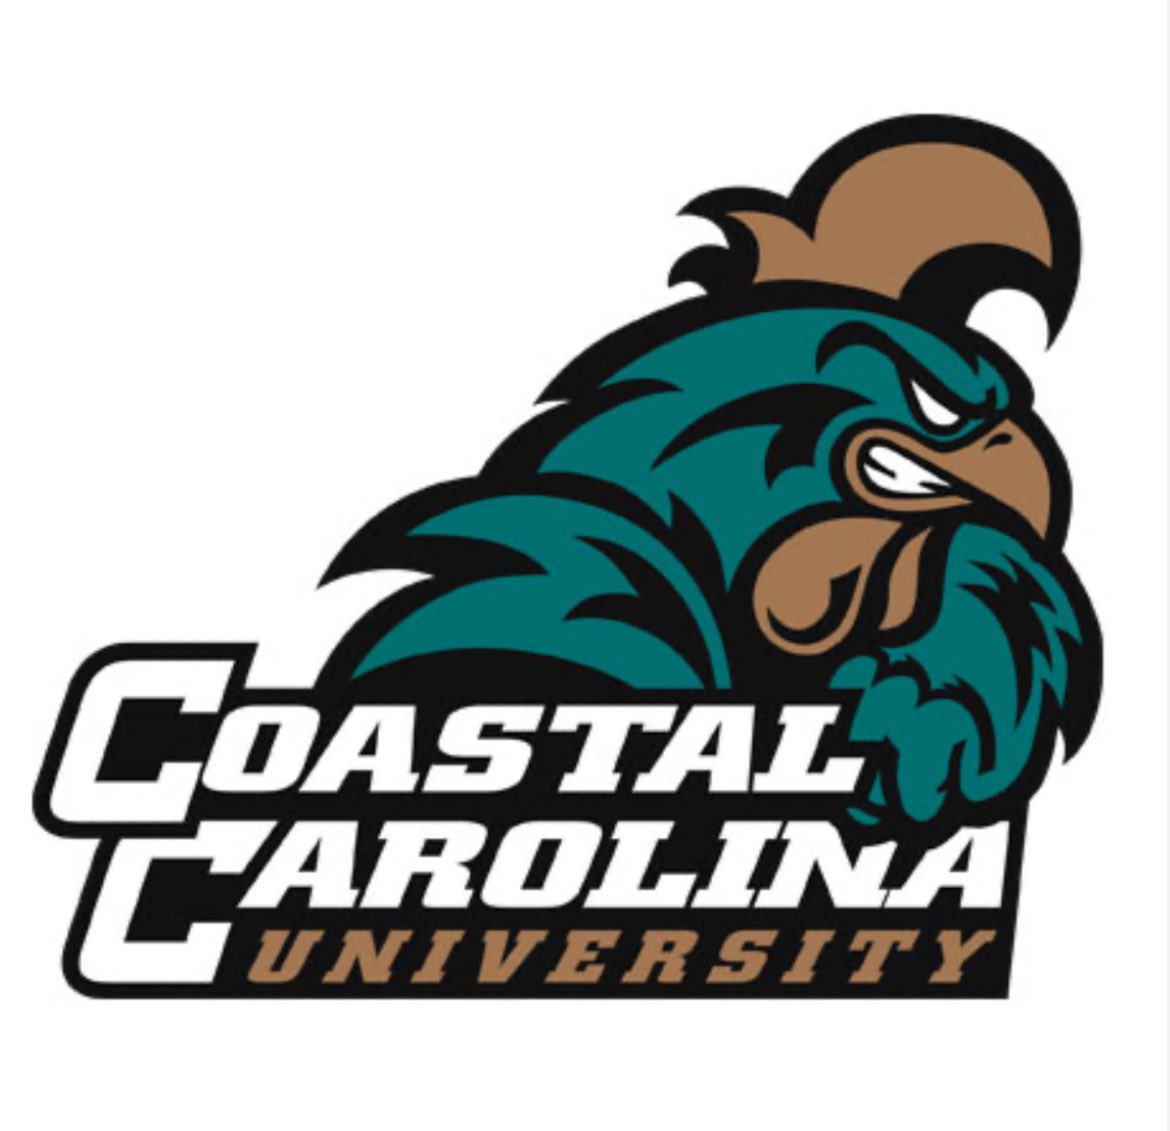 Excited about the offer to Coastal Carolina @CoachTTrickett @CoachAurandt @CoachDoehrman @NOHSFootball @RustyMansell_ @ChadSimmons_ @SWiltfong_